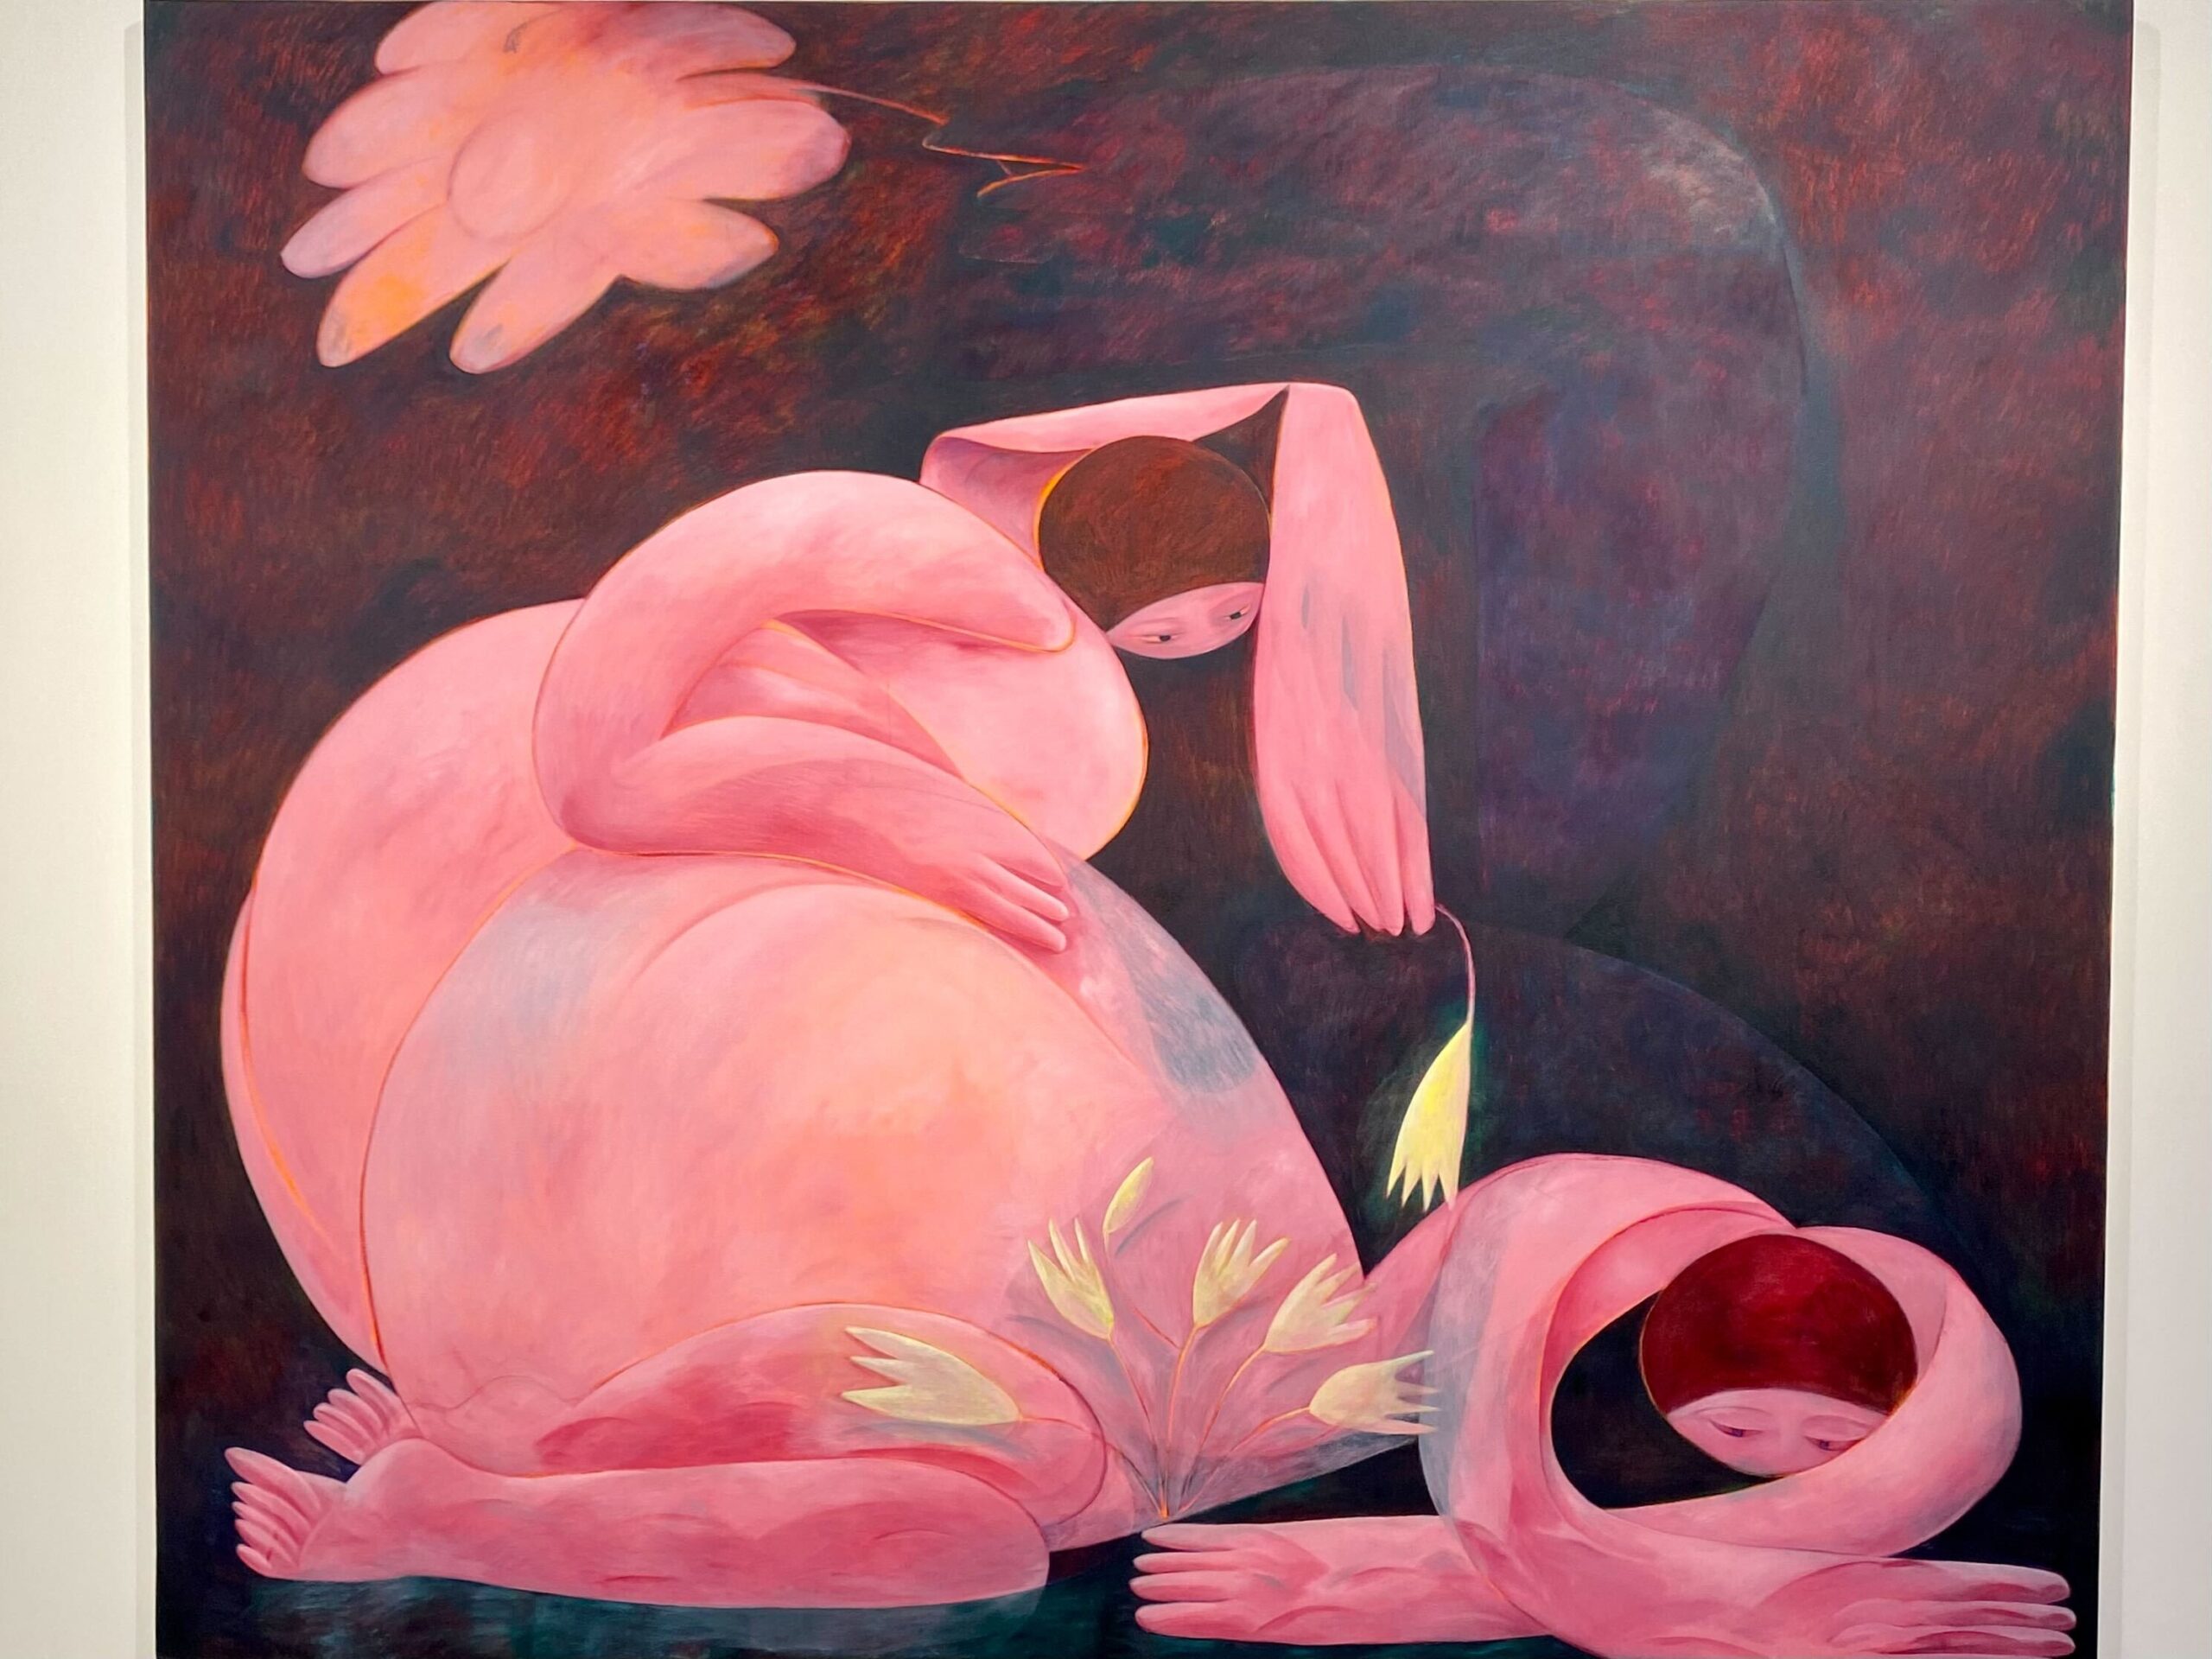 Abstract painting featuring two pink human-like figures against a dark background. One figure is seated, cradling a flower, while the other figure is bent over with a contemplative posture. Both have rounded, flowing forms, and the scene evokes a surreal, dream-like atmosphere.